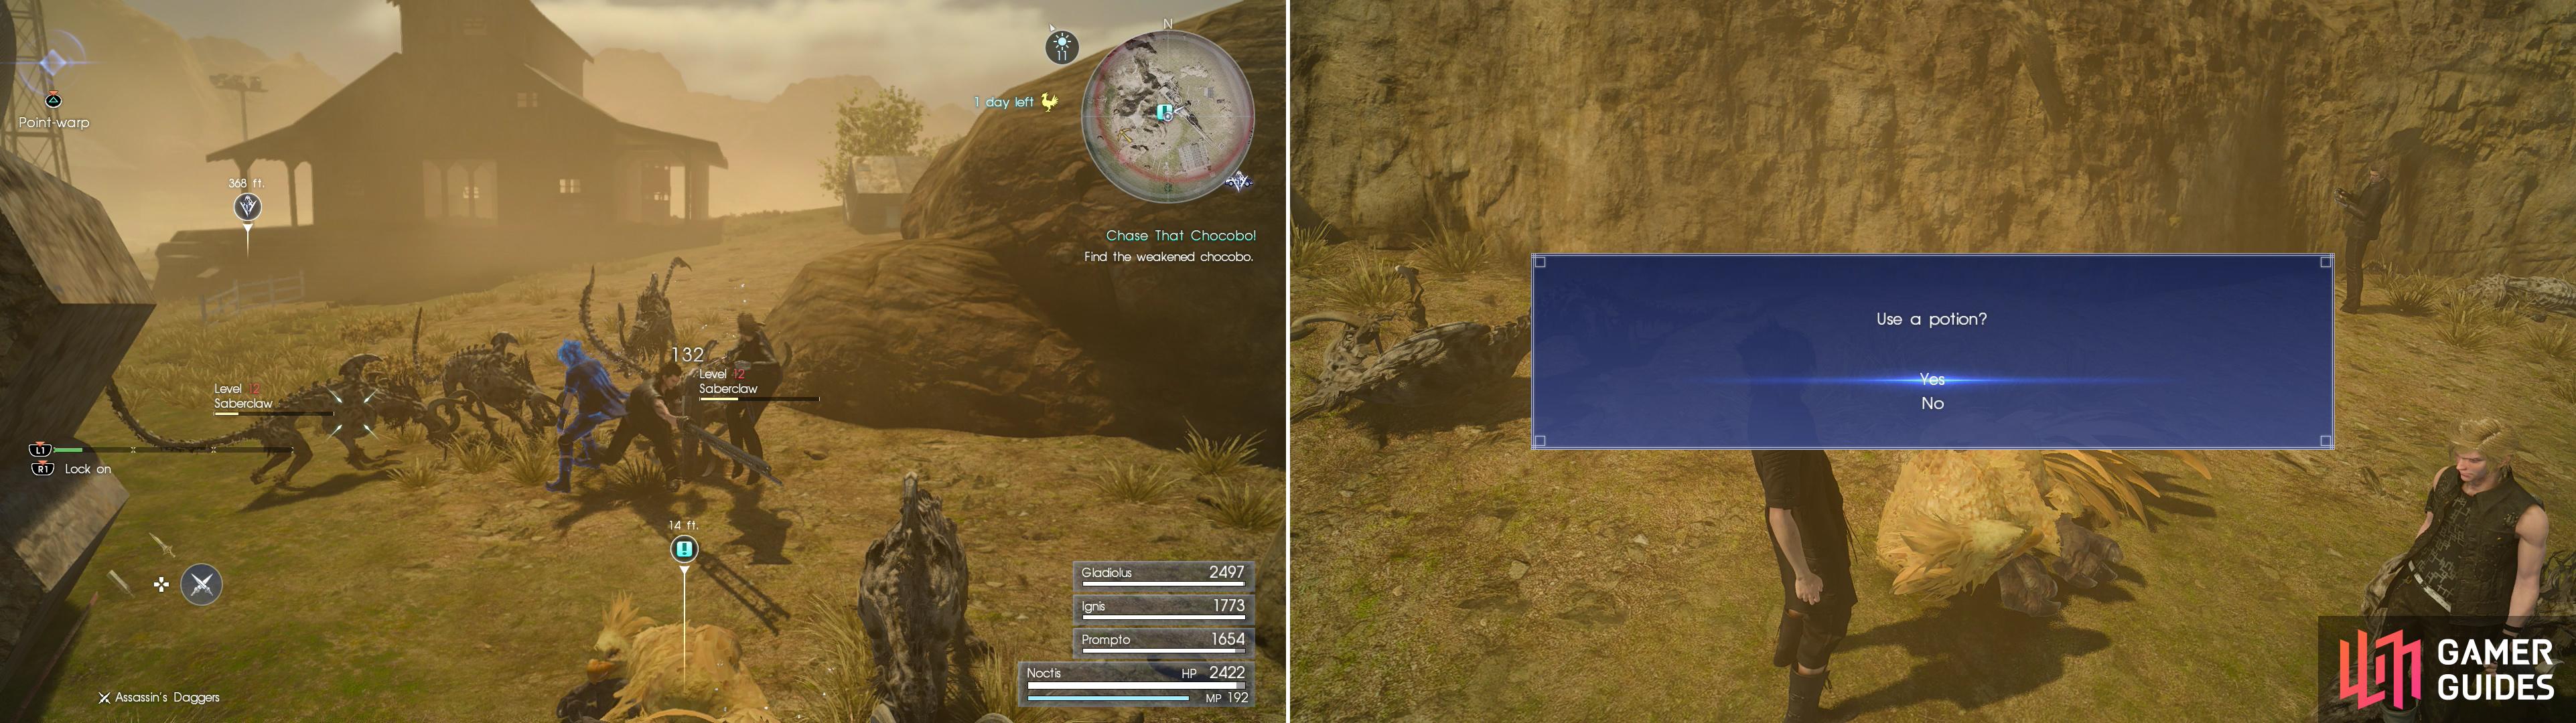 Examine the wounded Chocobo and you’ll be ambushed by some leveled Sabertusks (left). Kill them and squander a Potion on the bird to get it back on its feet (right).